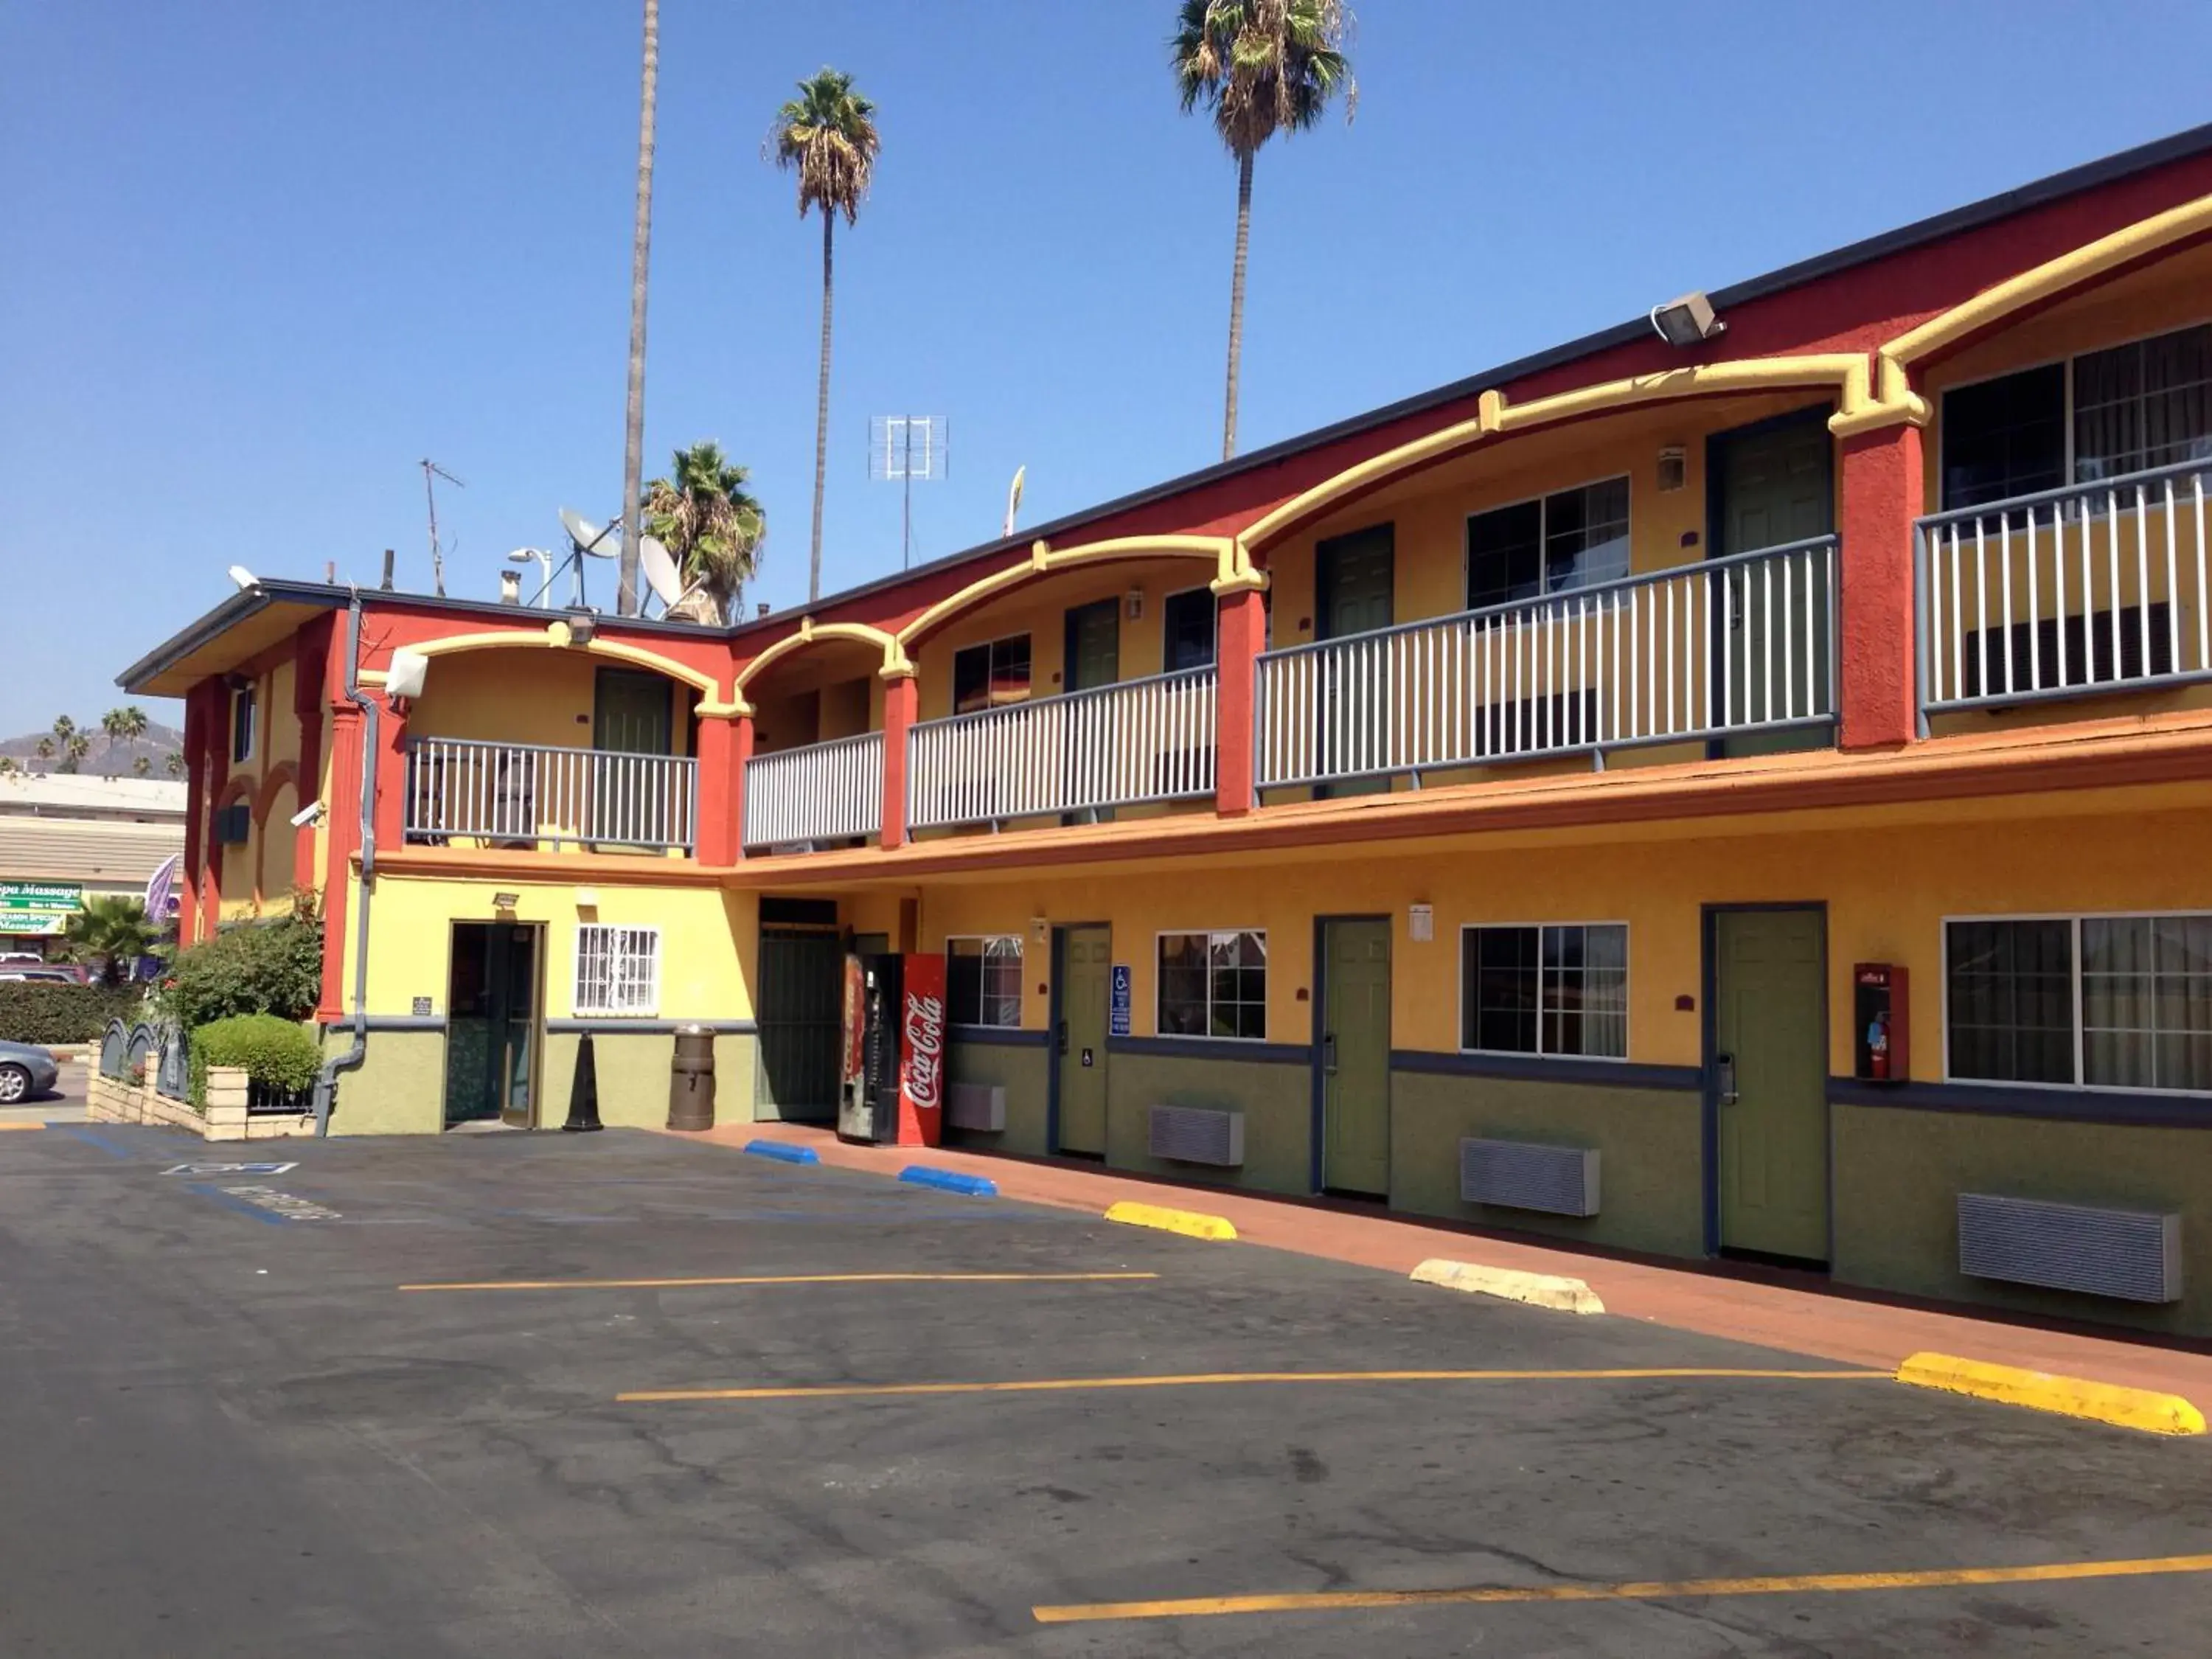 Property Building in Economy Inn Hollywood